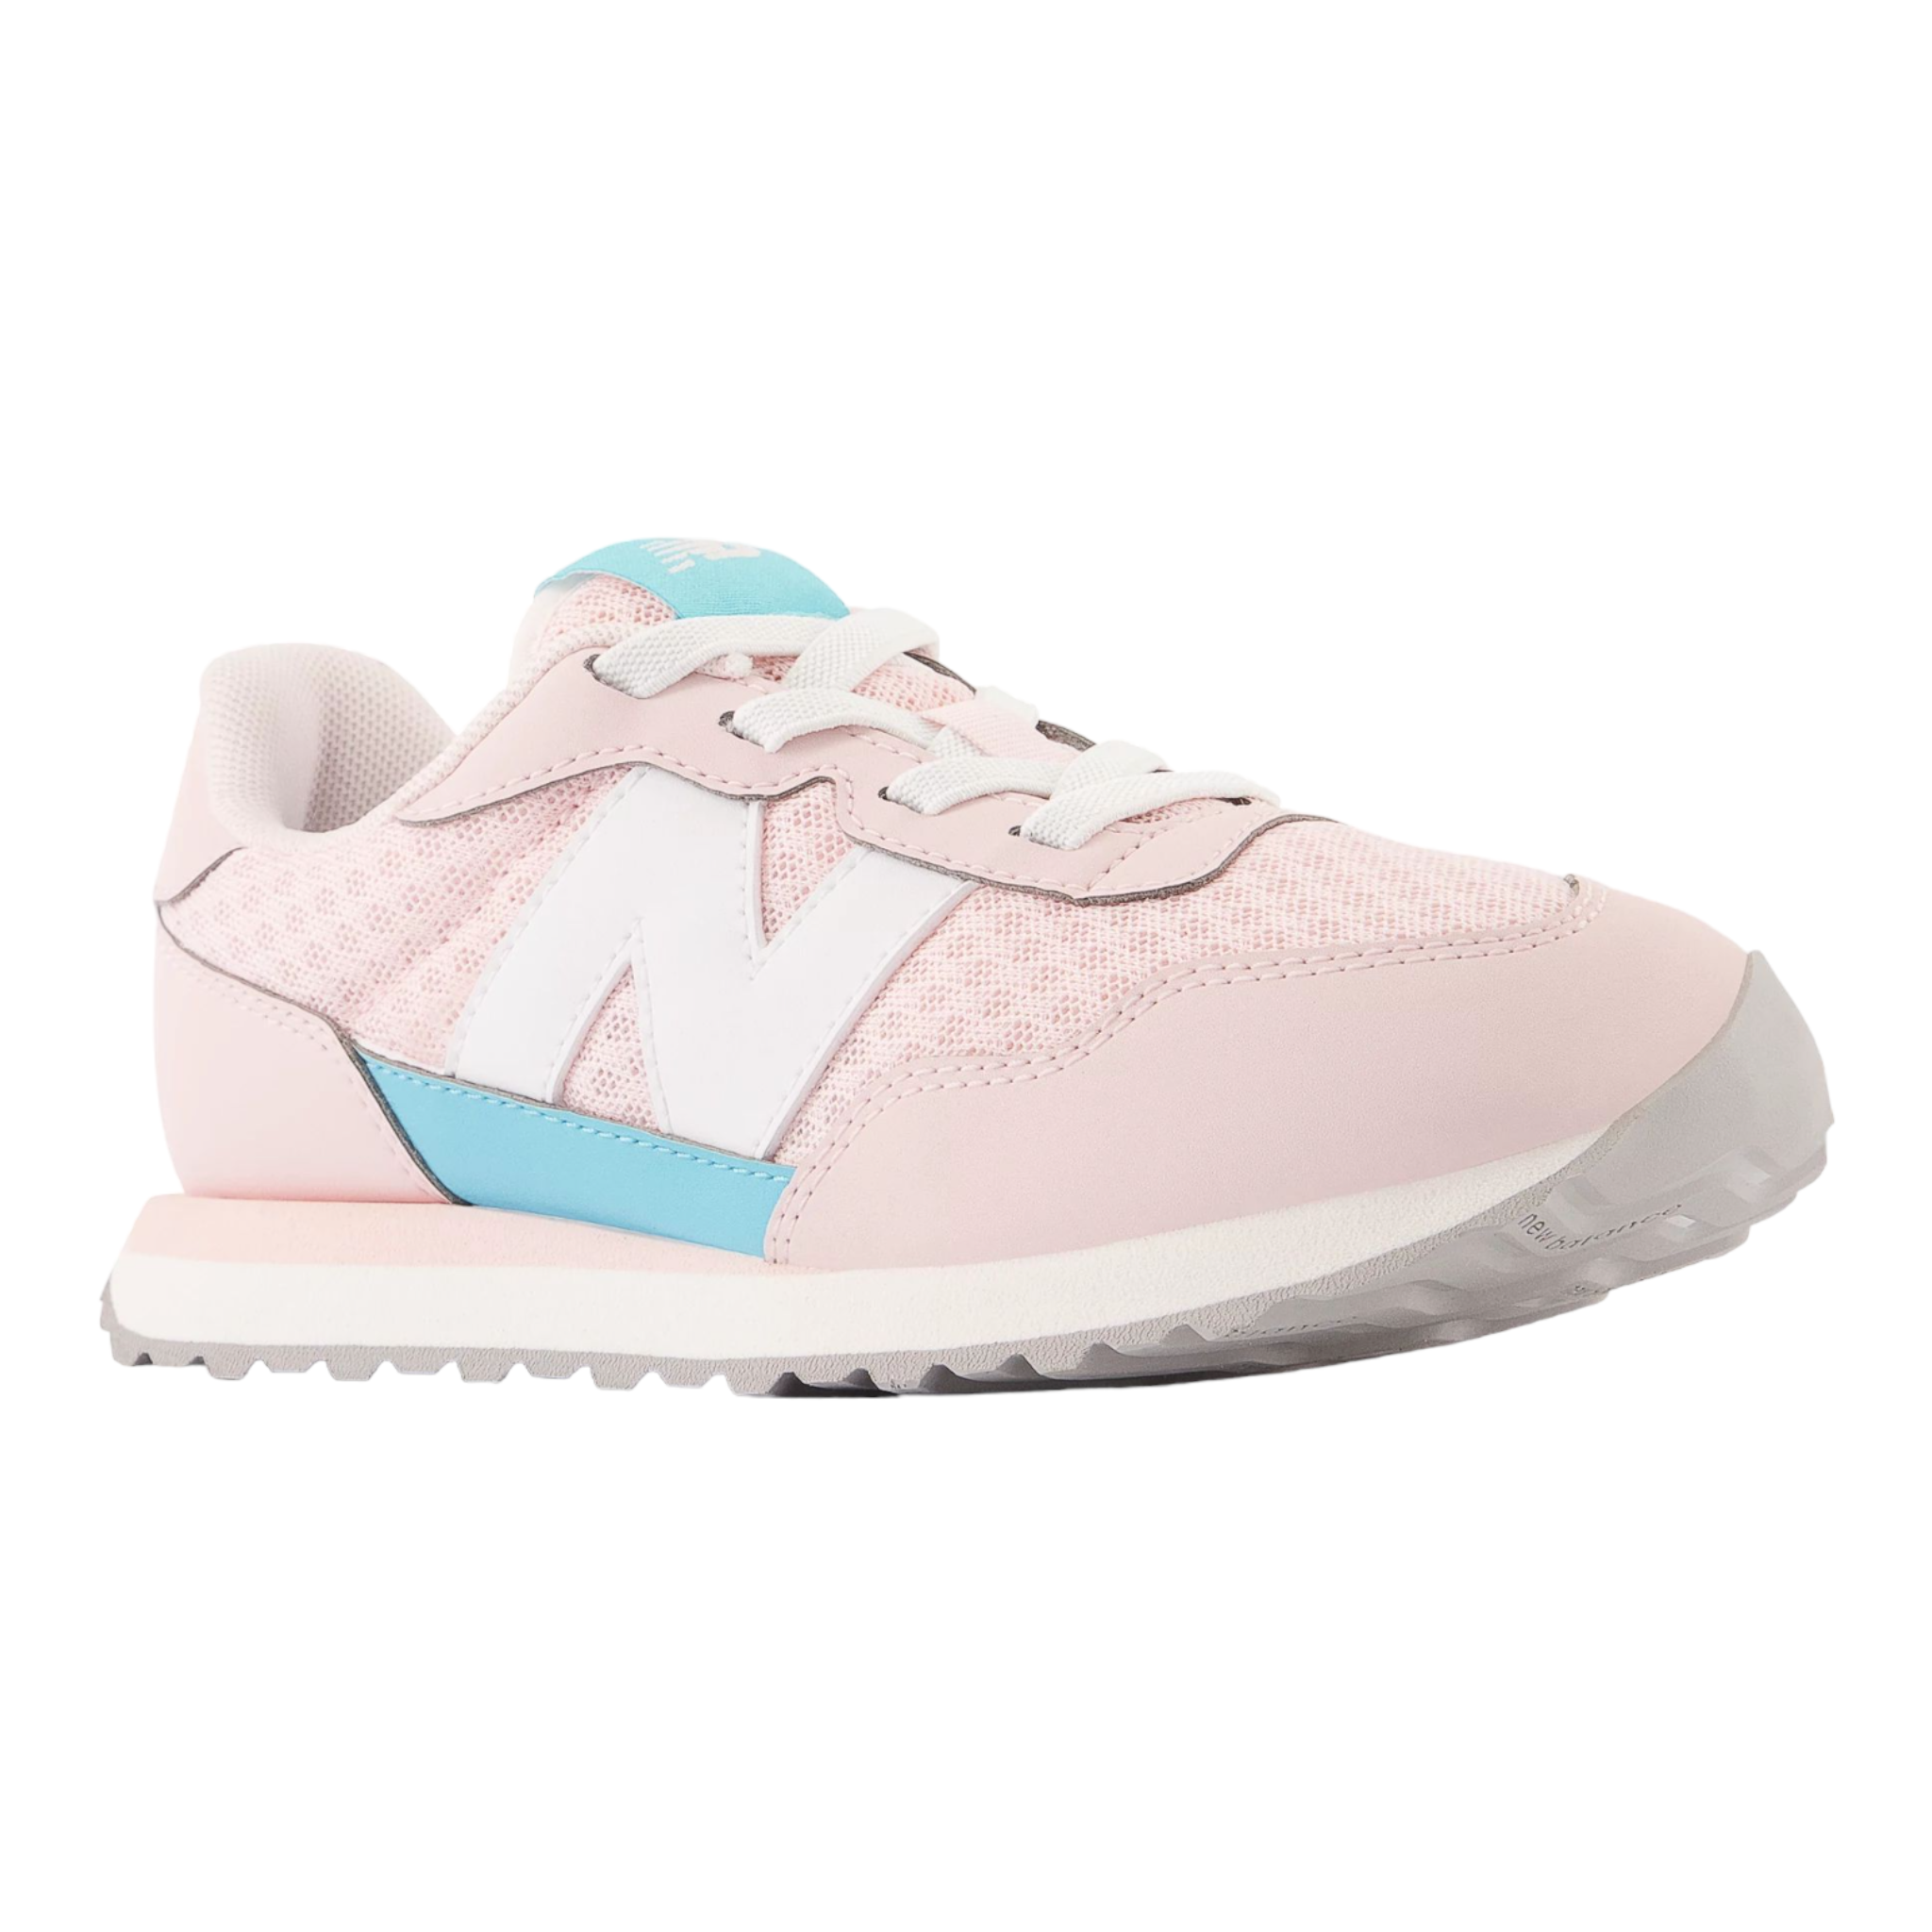 Arena Appal lancering New Balance 237 Bungee Sneaker – Sikes Children's Shoe Store